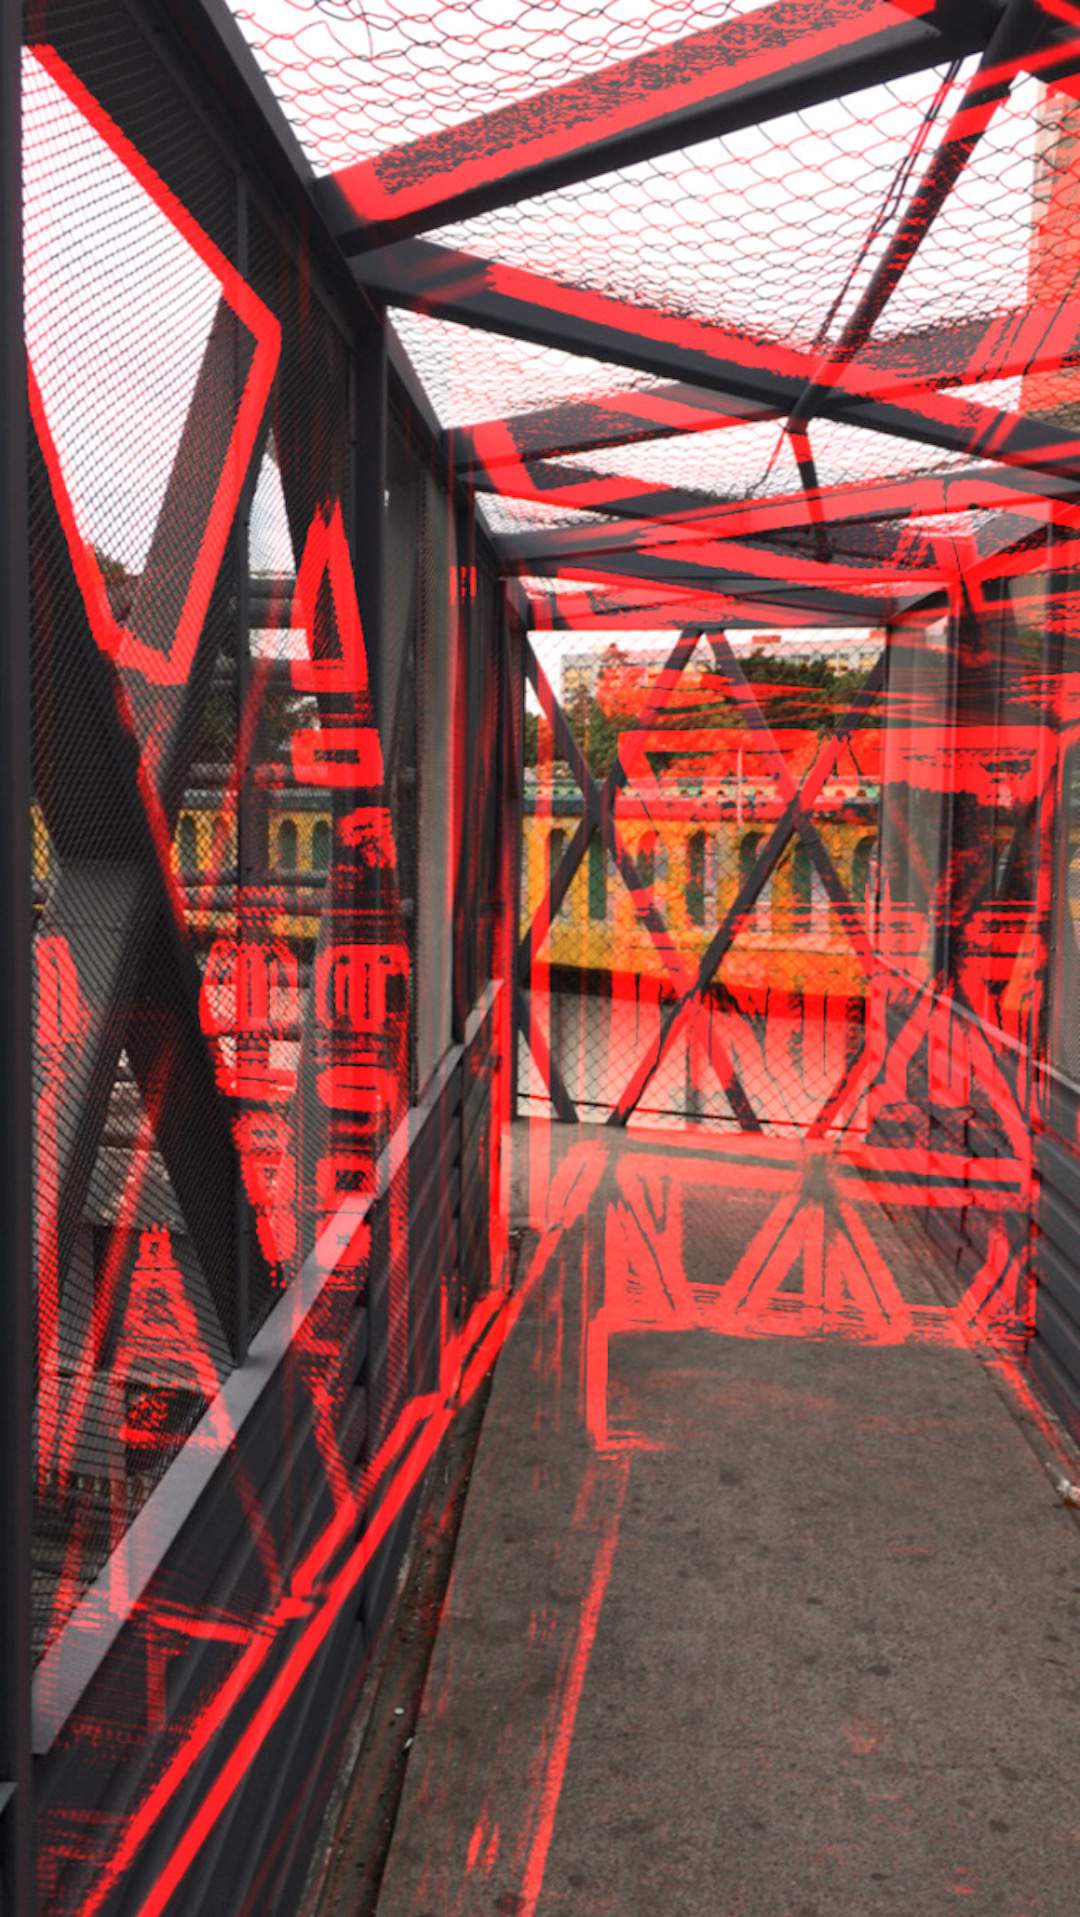 image of a bridge with a red overlay tracing the lines